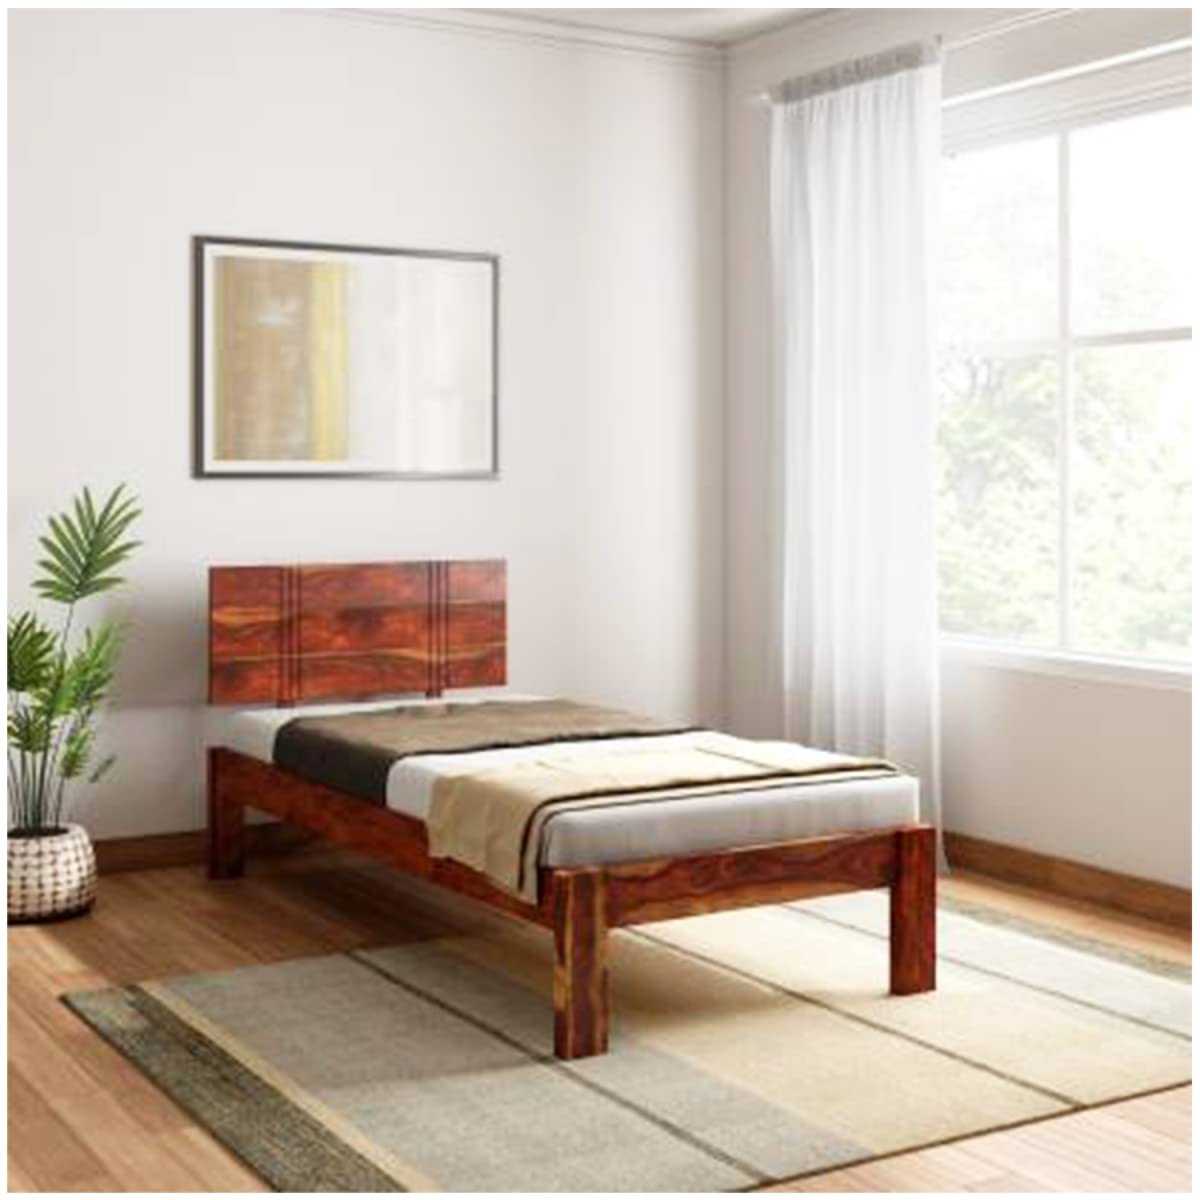 The convenience of shopping online for single beds